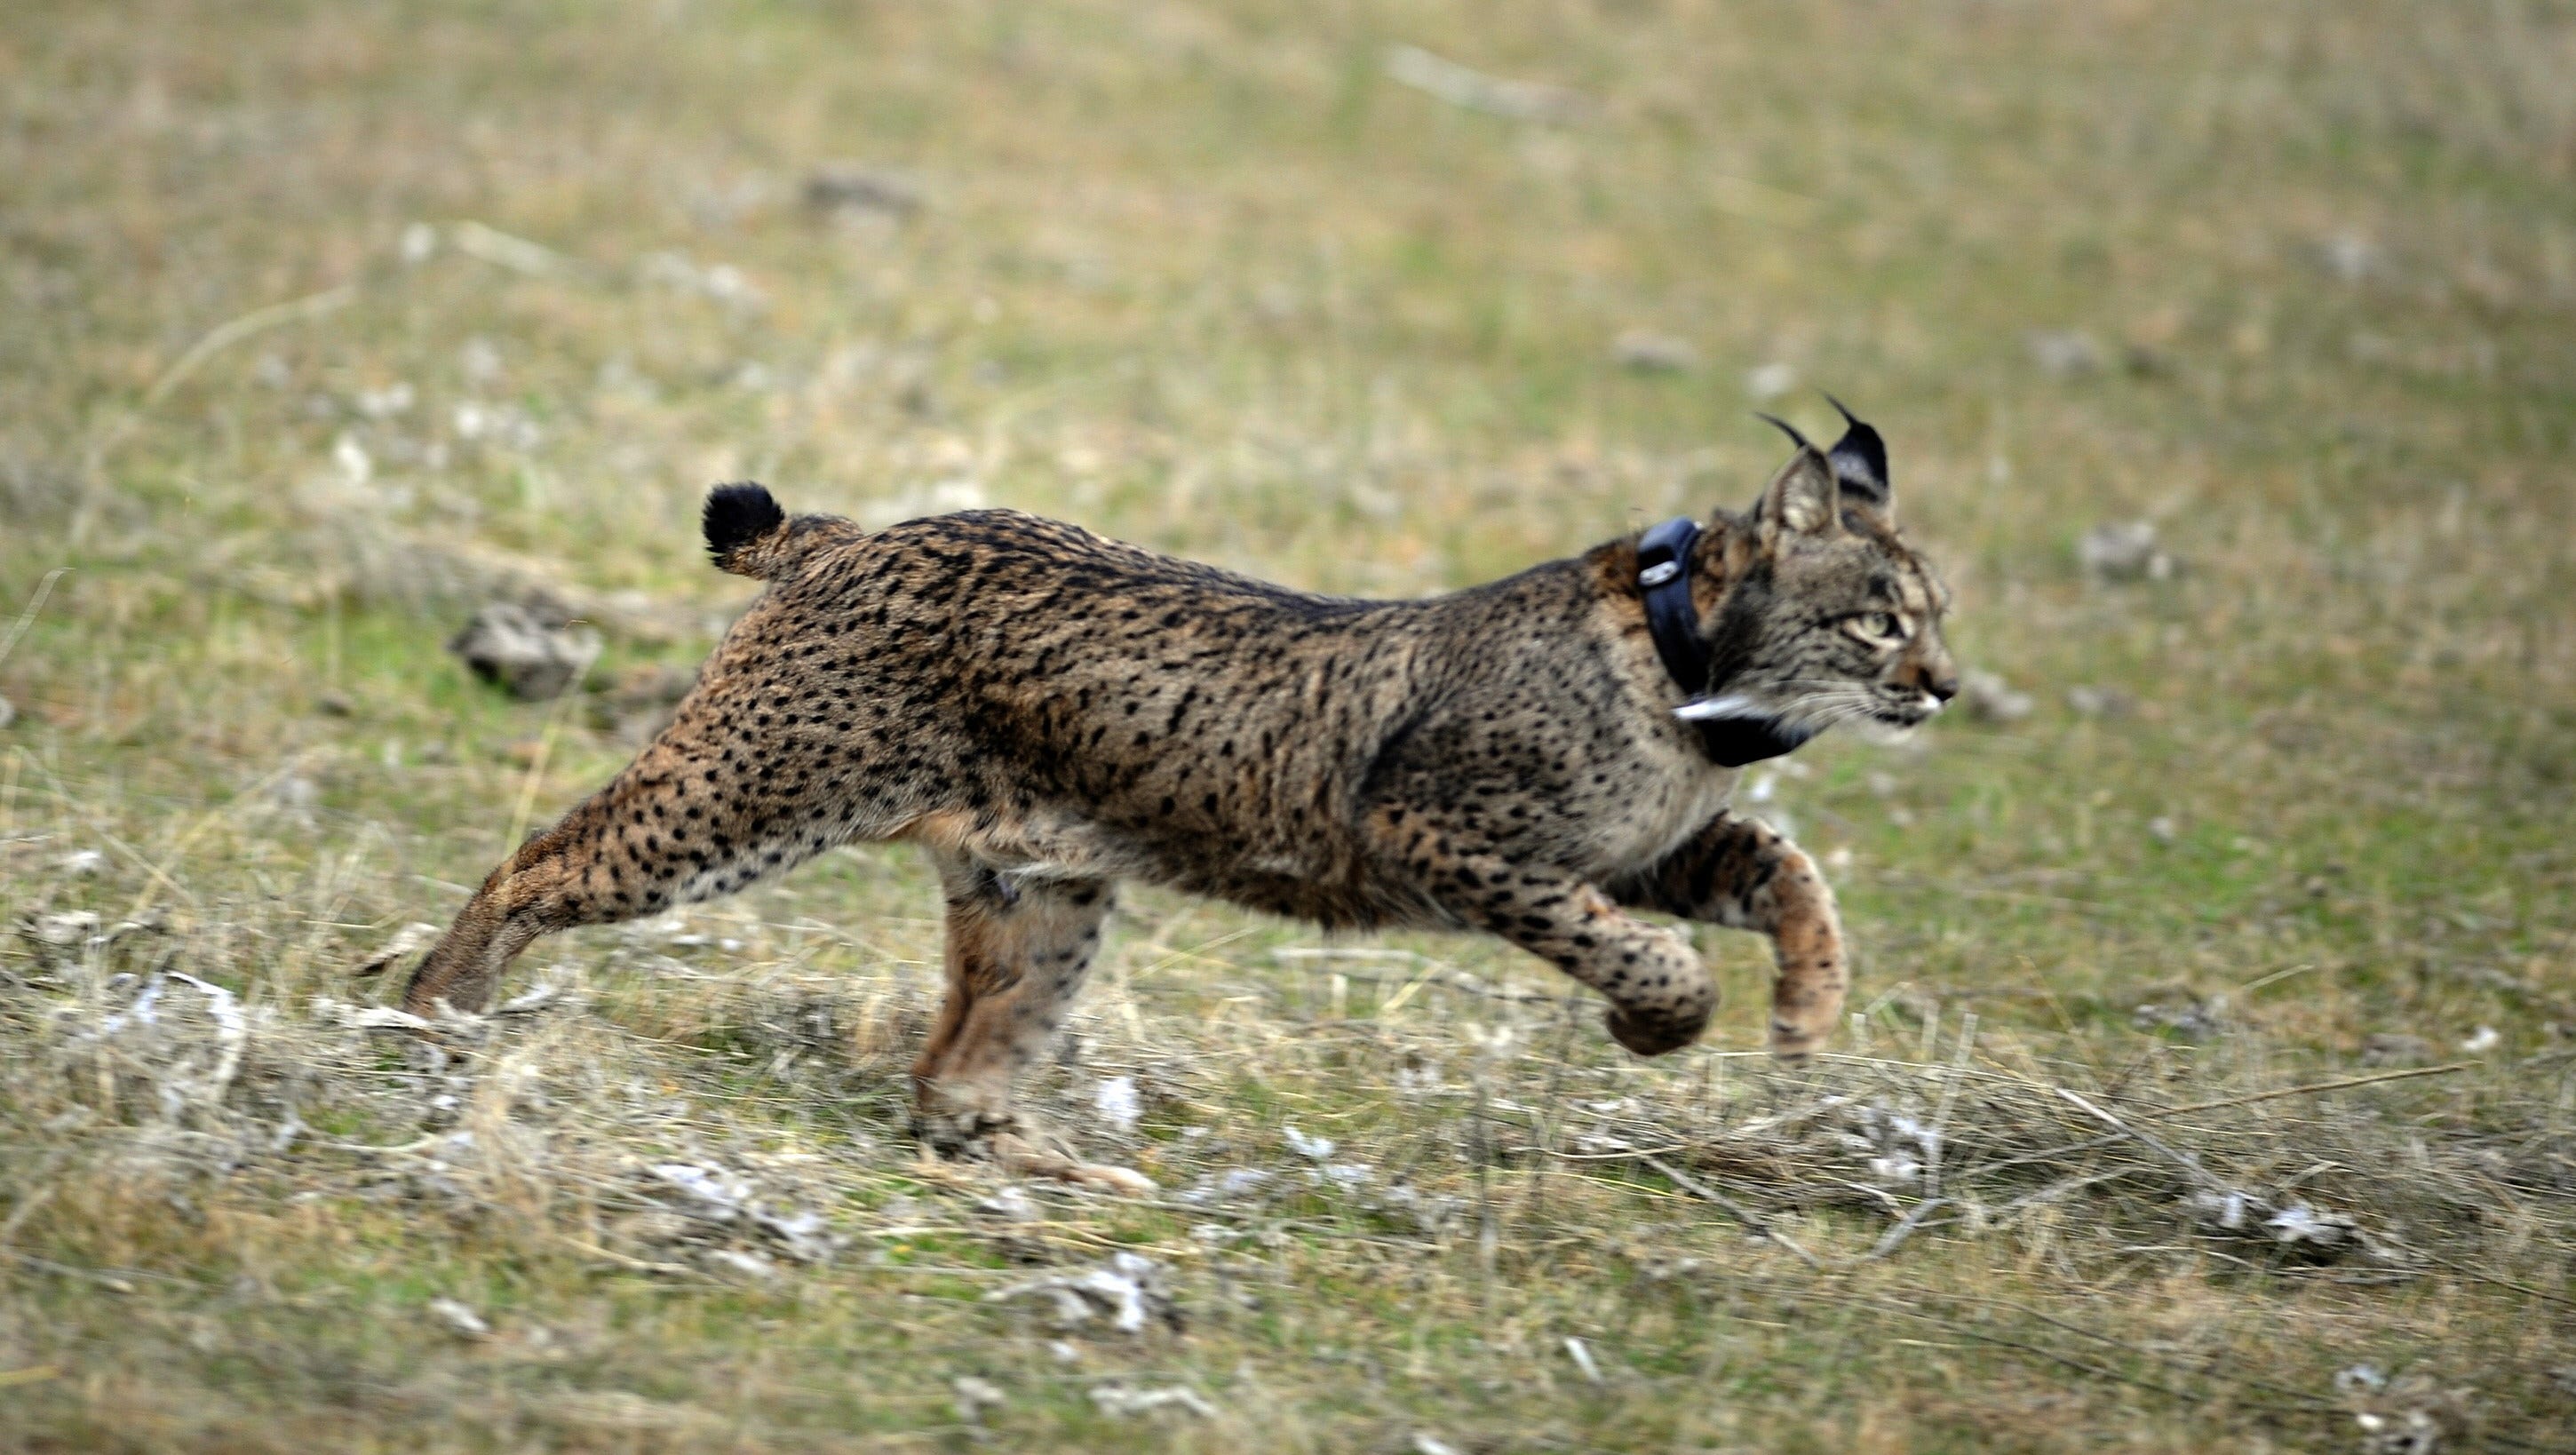 Saving the Iberian lynx from extinction, one cat at a time